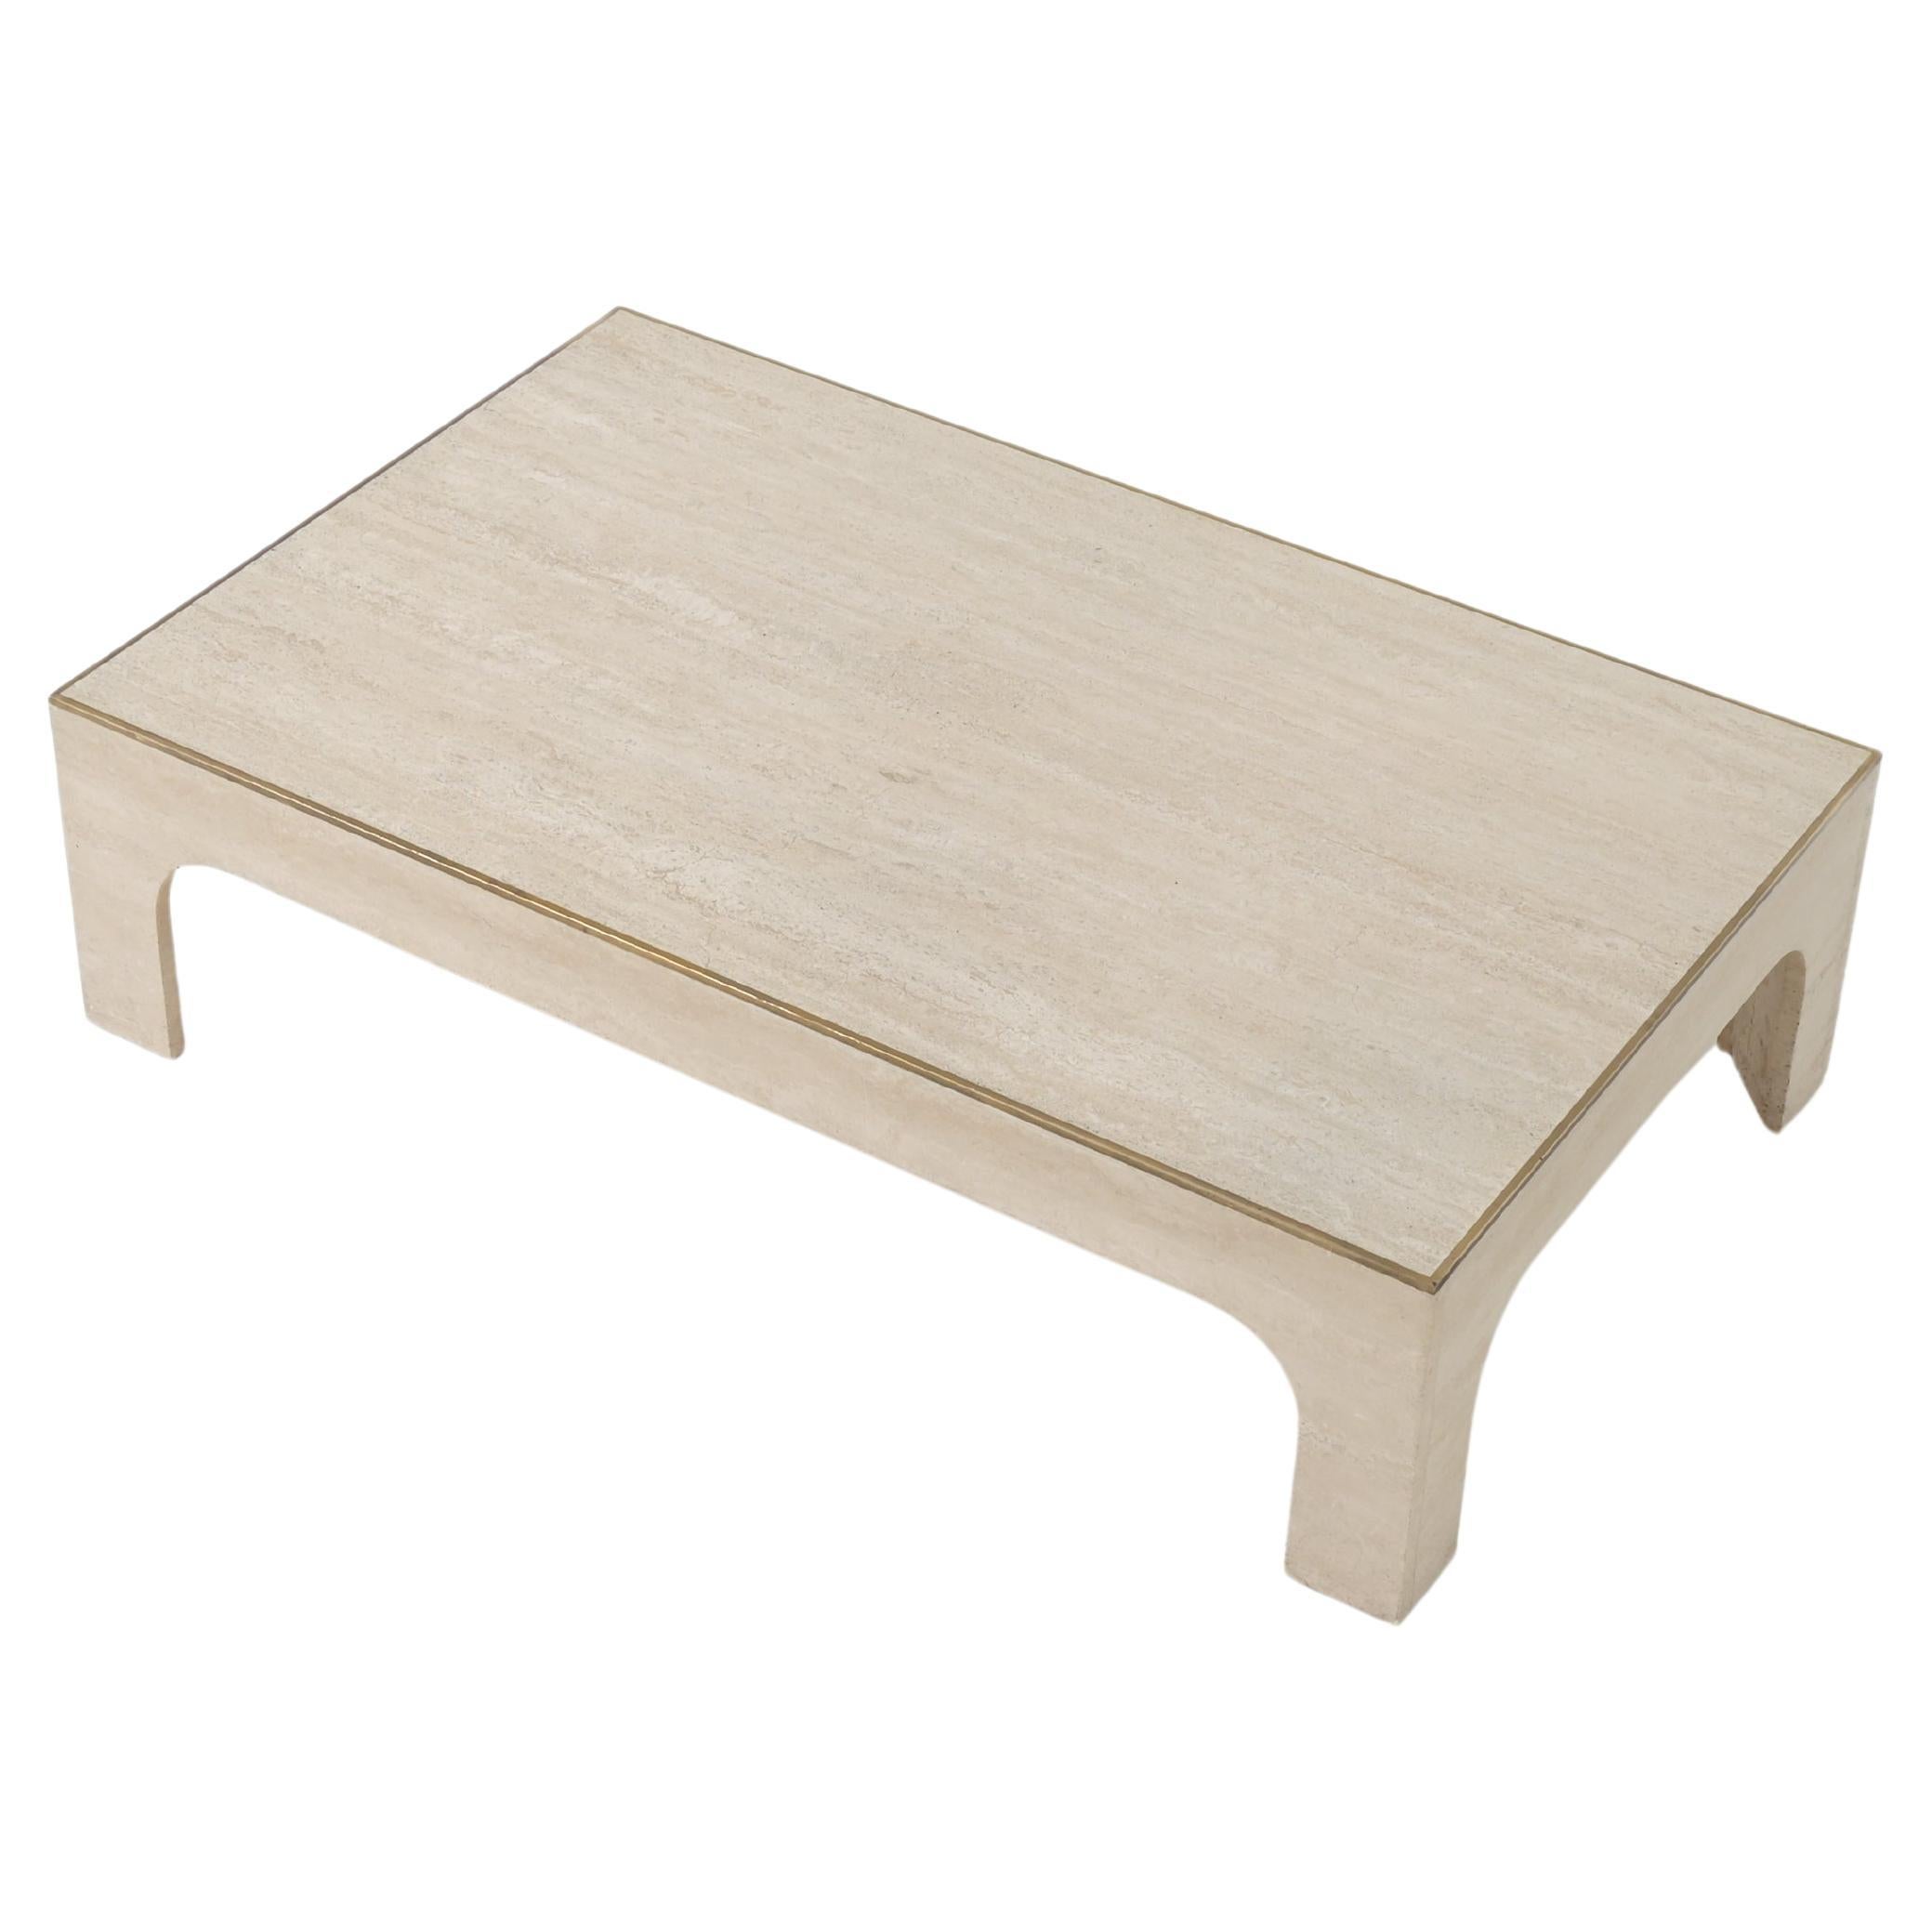 Willy Rizzo travertine coffee table